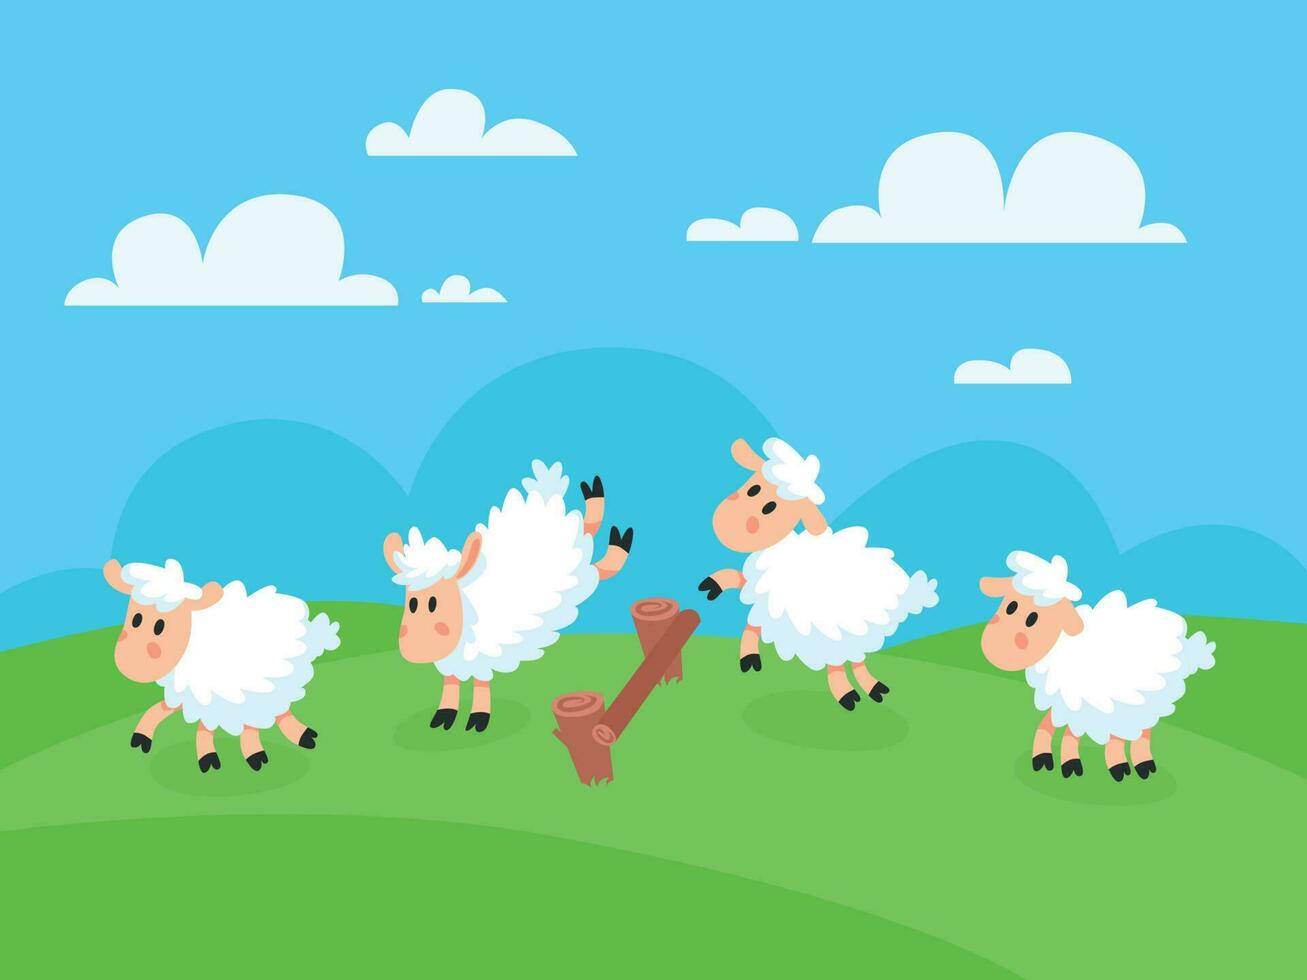 Counting jumping sheeps for goodnight sleep. Sheep jump over fence for insomnia vector concept illustration